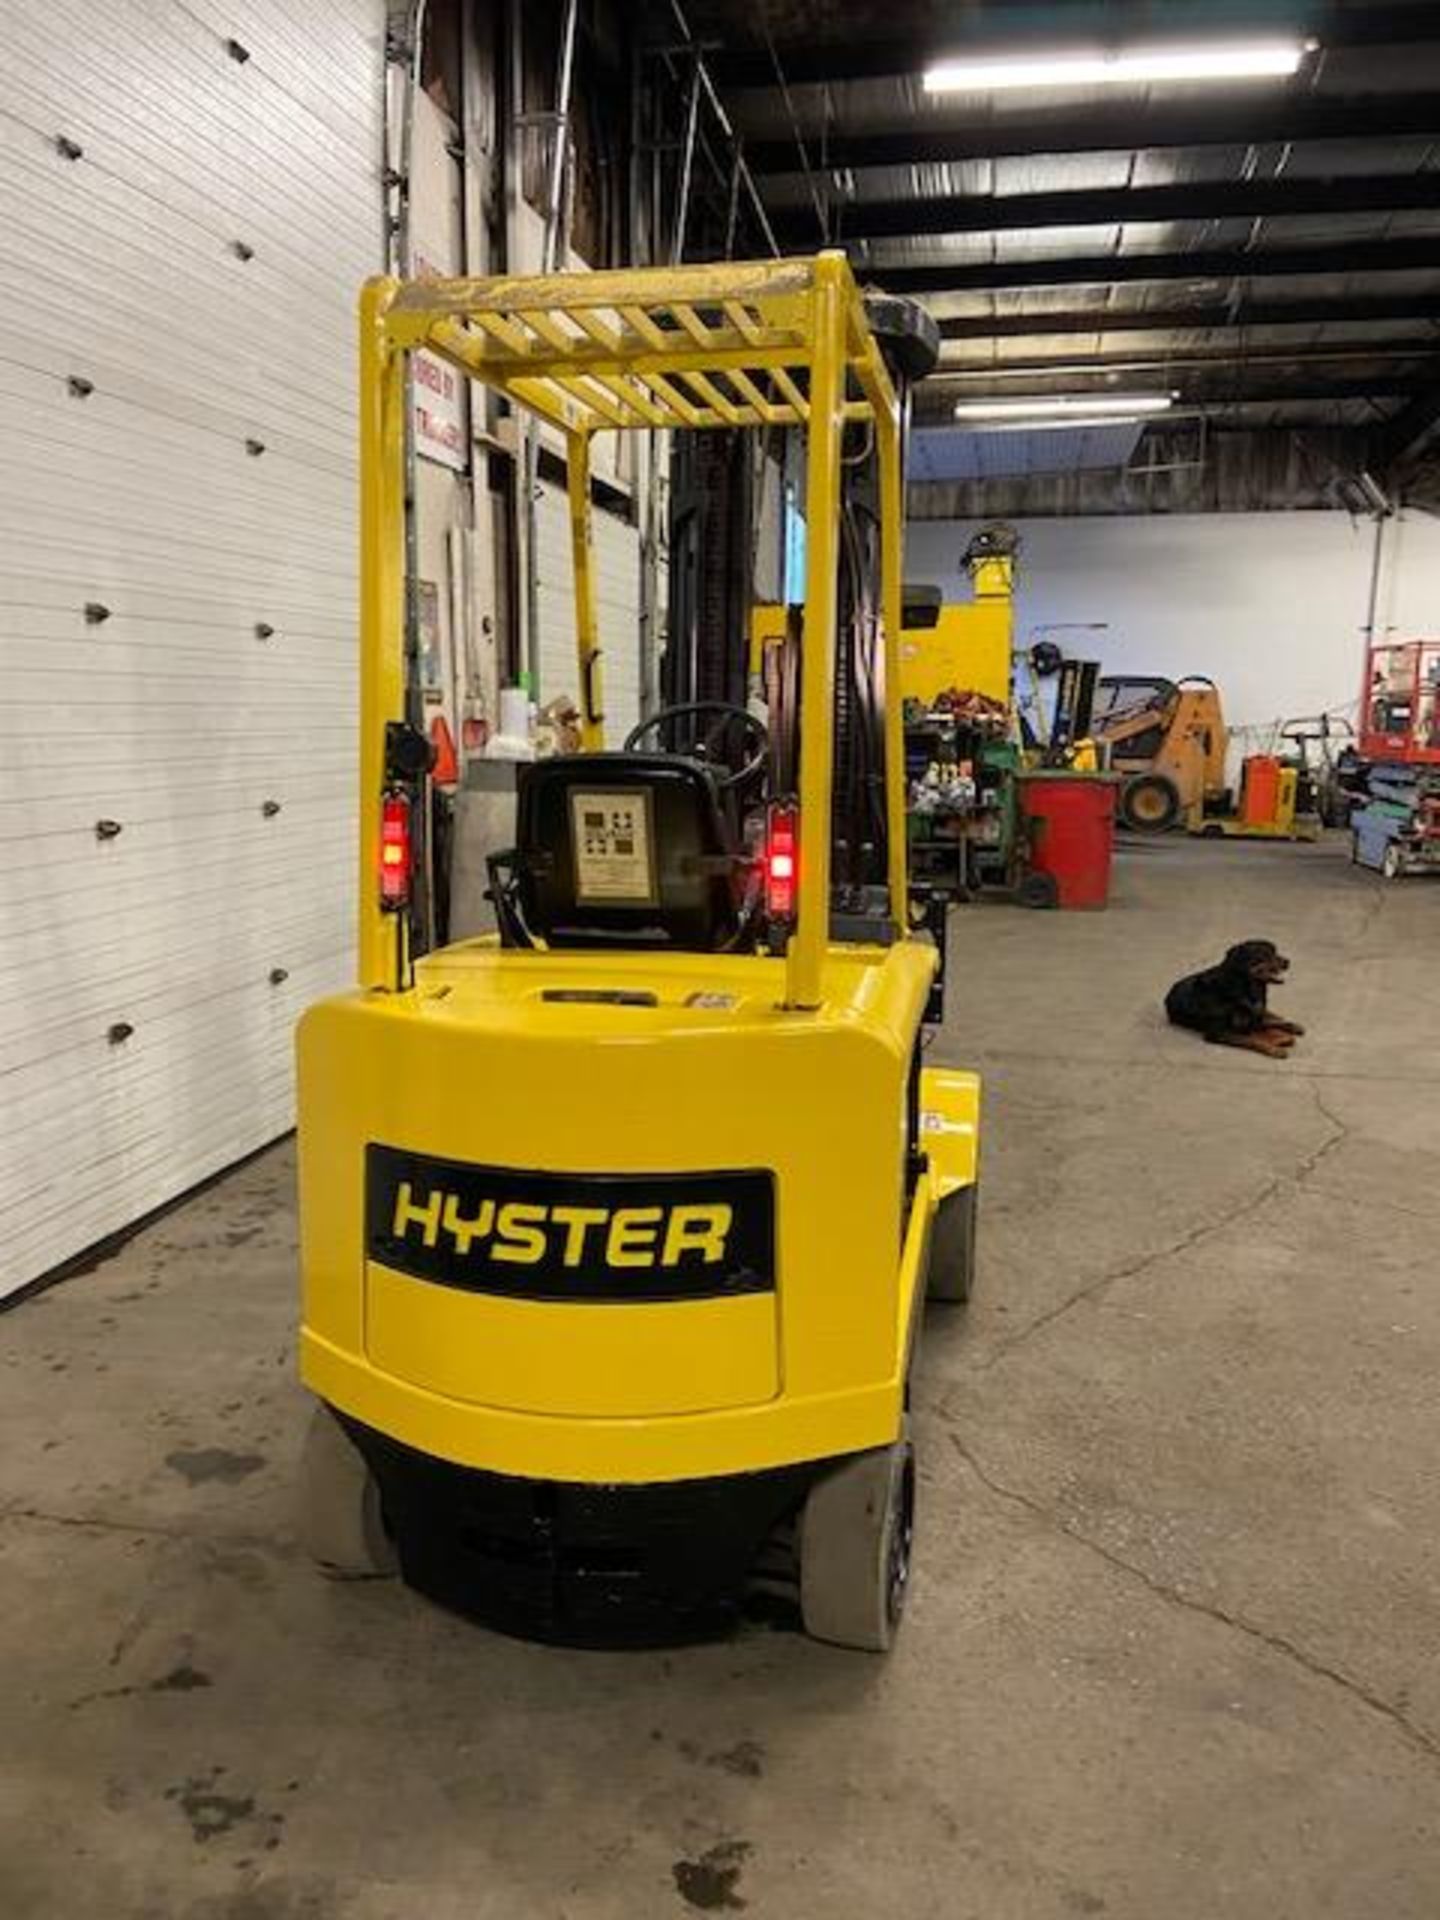 FREE CUSTOMS - Hyster 6500lbs Capacity Forklift Electric with sideshift and 4-STAGE mast LOW HOURS - Image 3 of 3